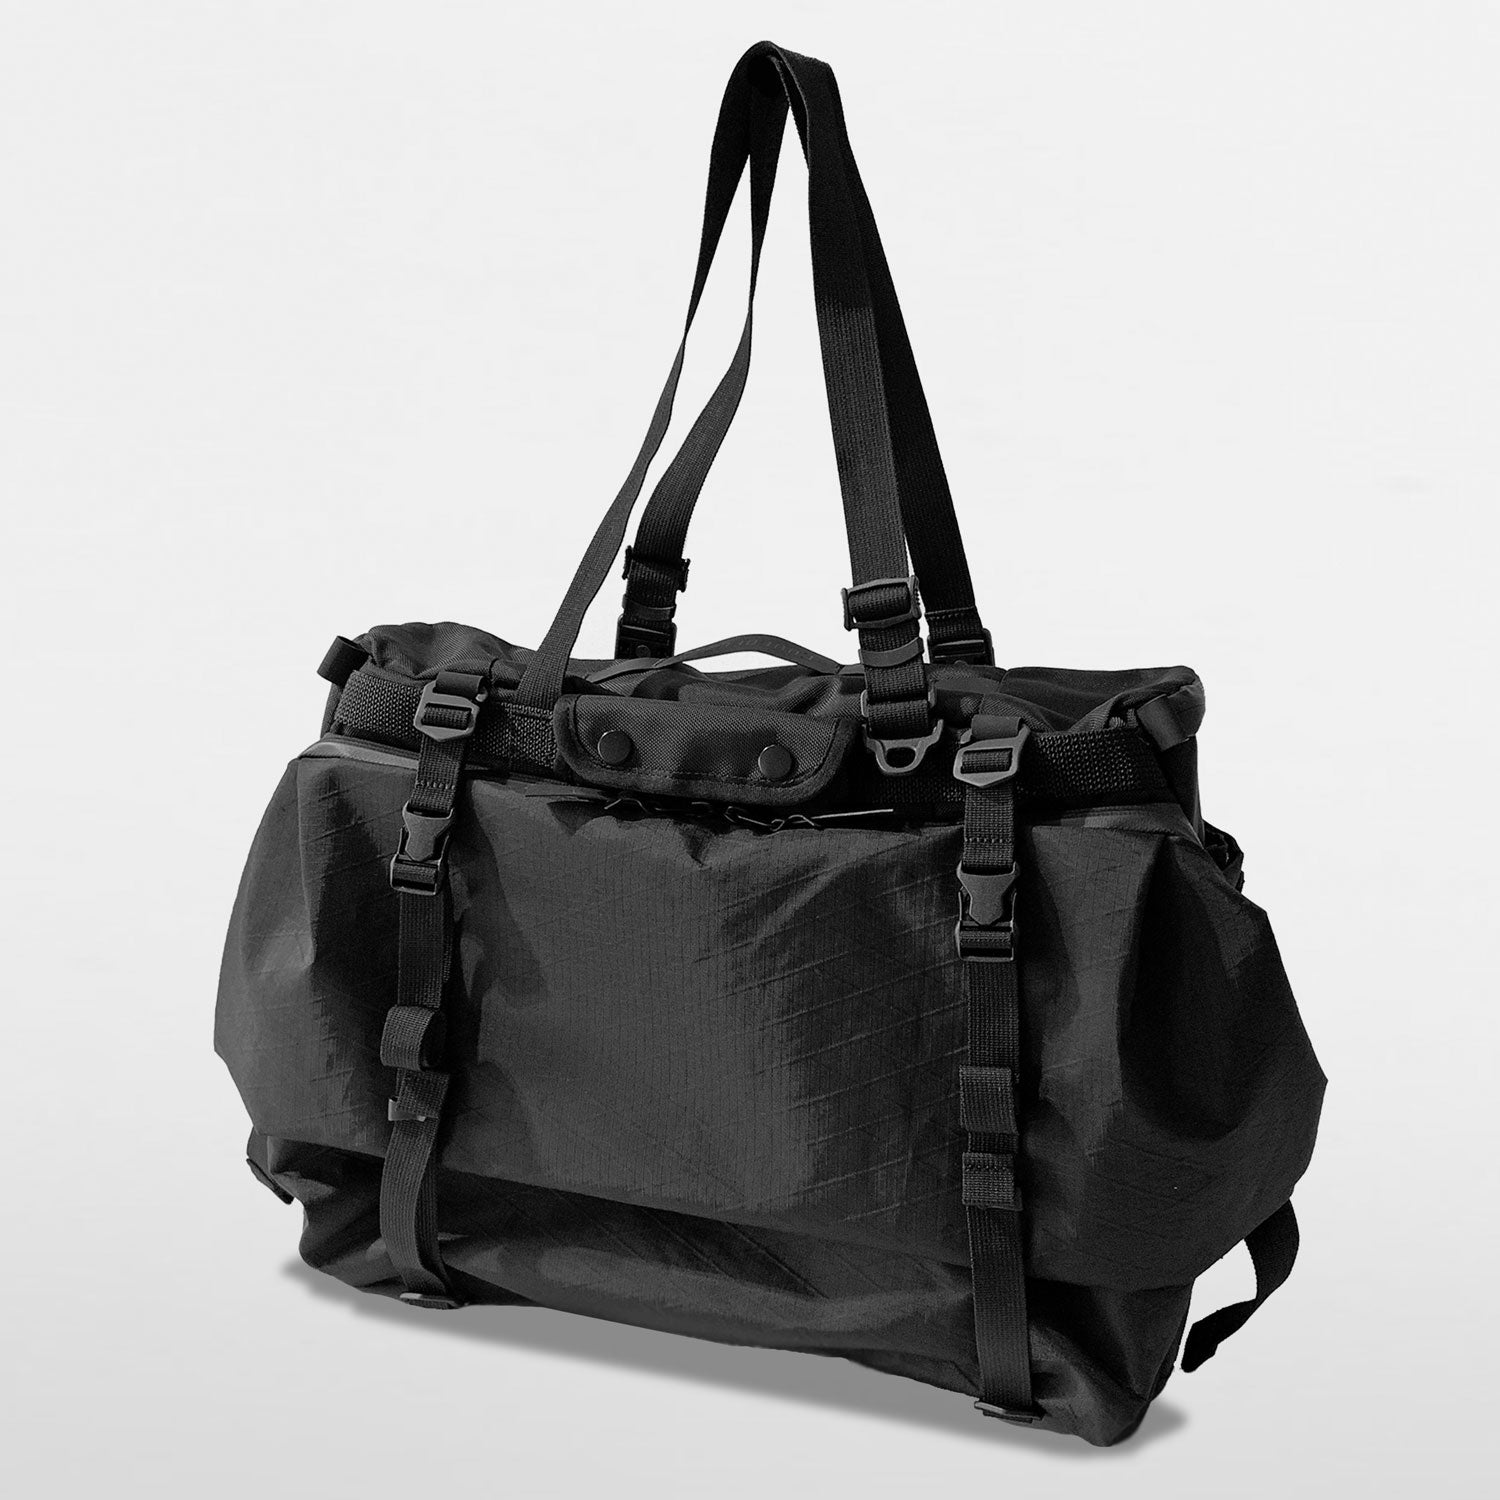 X-TOTE / 3-Way Messenger Tote | CODE OF BELL コードオブベル クロス